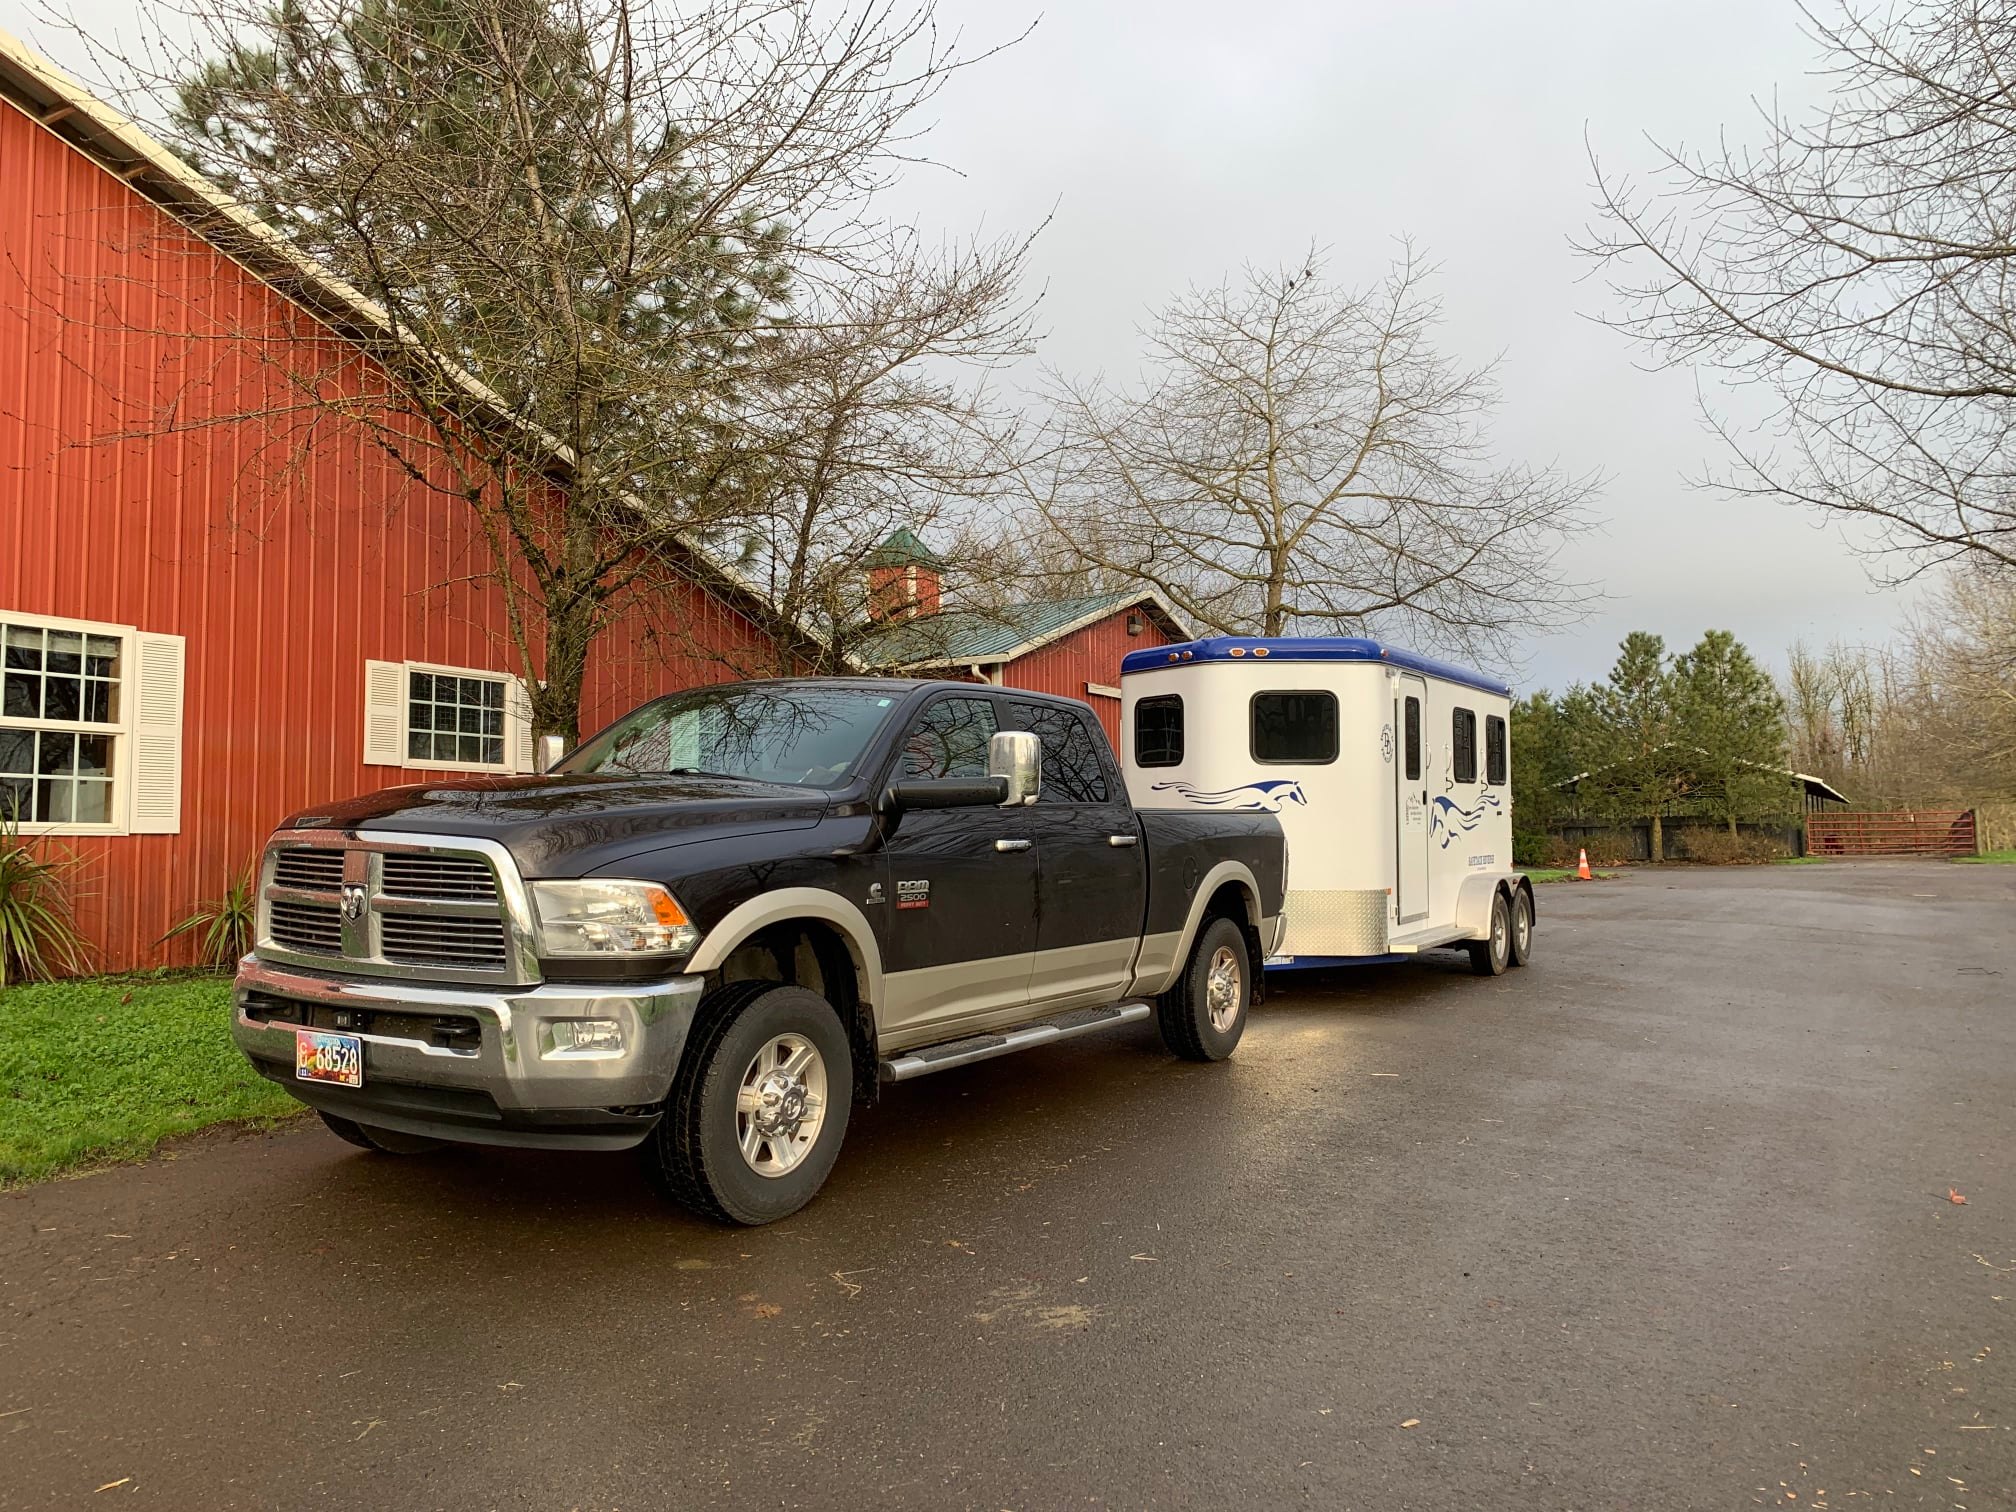 Double D Trailers SafeTack Reverse 2 Horse Bumper Pull Trailer hitched to a Dodge truck.